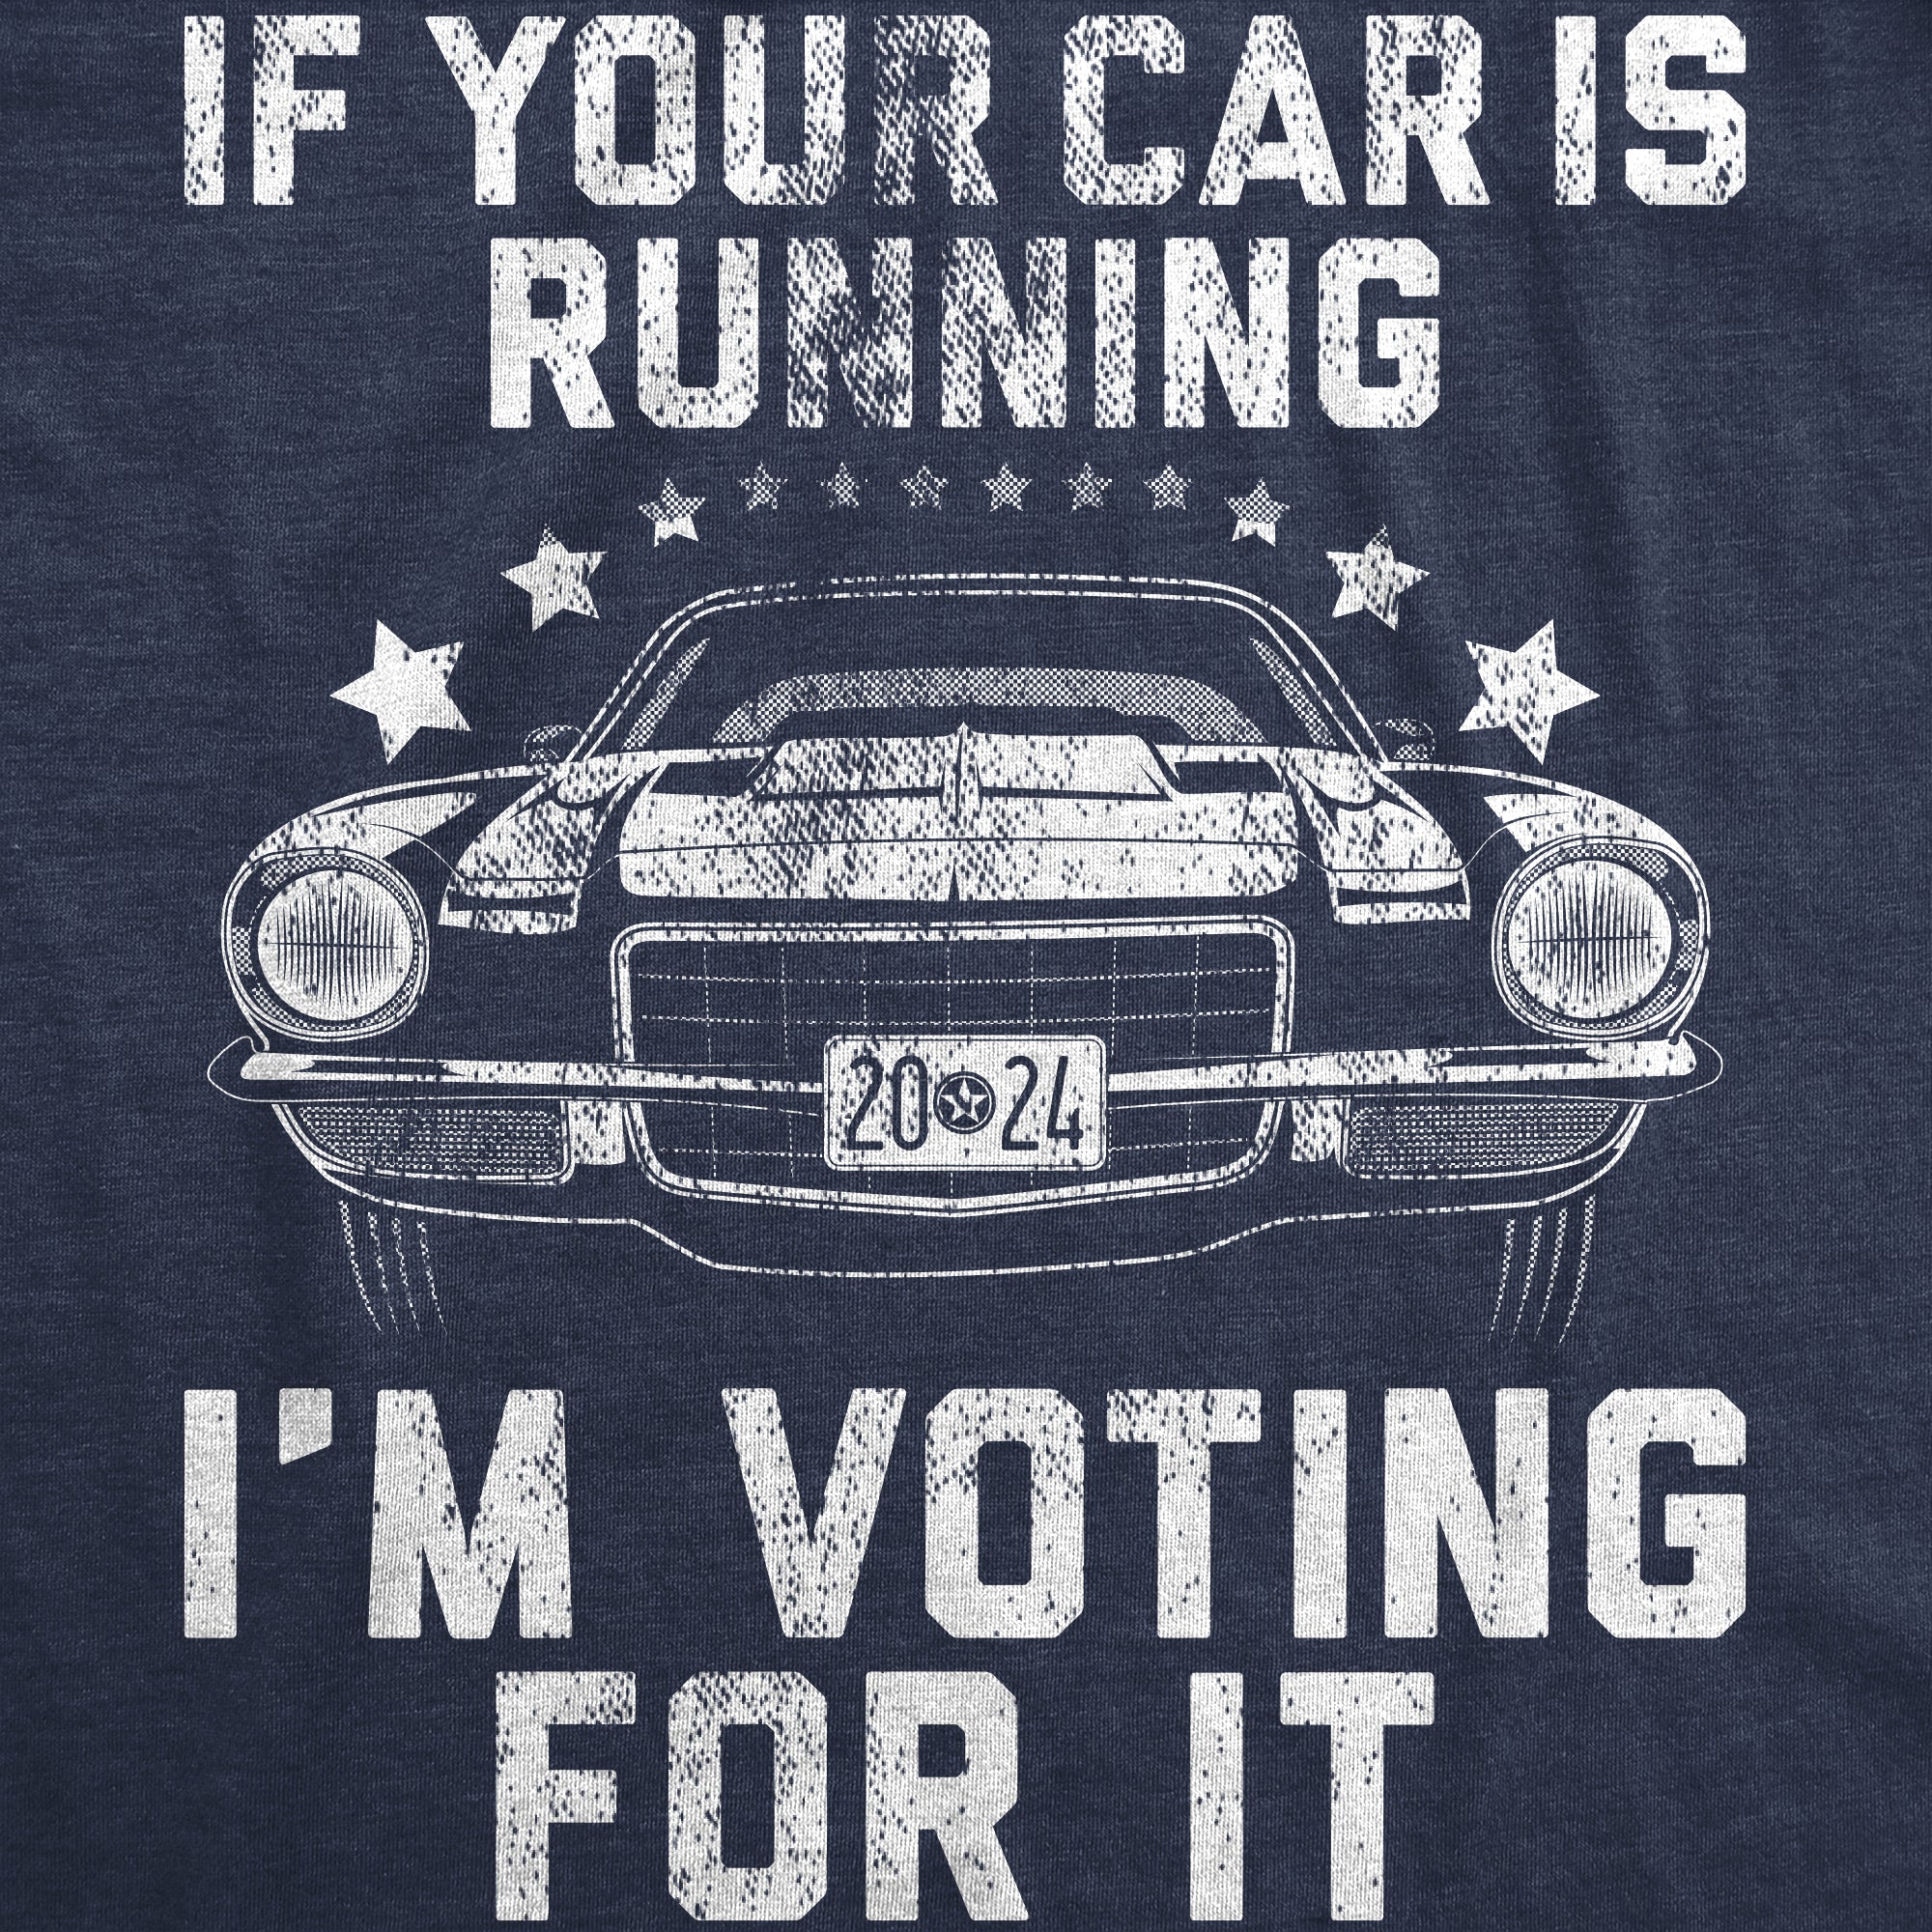 Funny Heather Navy - Car Running Im Voting For It If Your Car Is Running Im Voting For It Mens T Shirt Nerdy mechanic sarcastic Tee